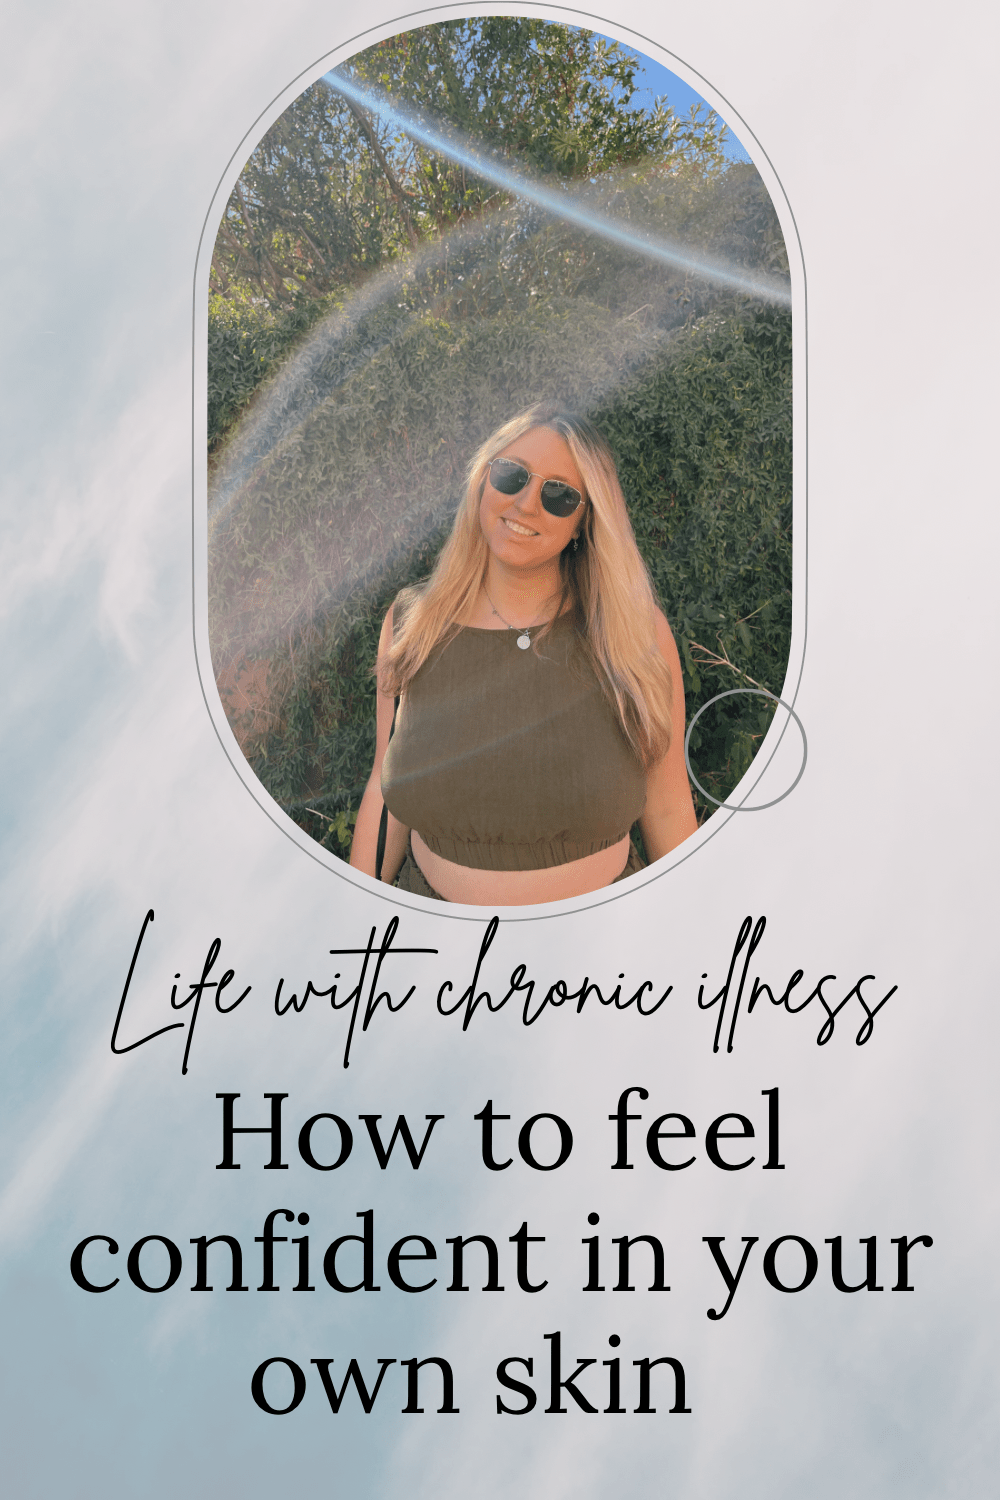 Life with chronic illness how to feel confident in your own skin